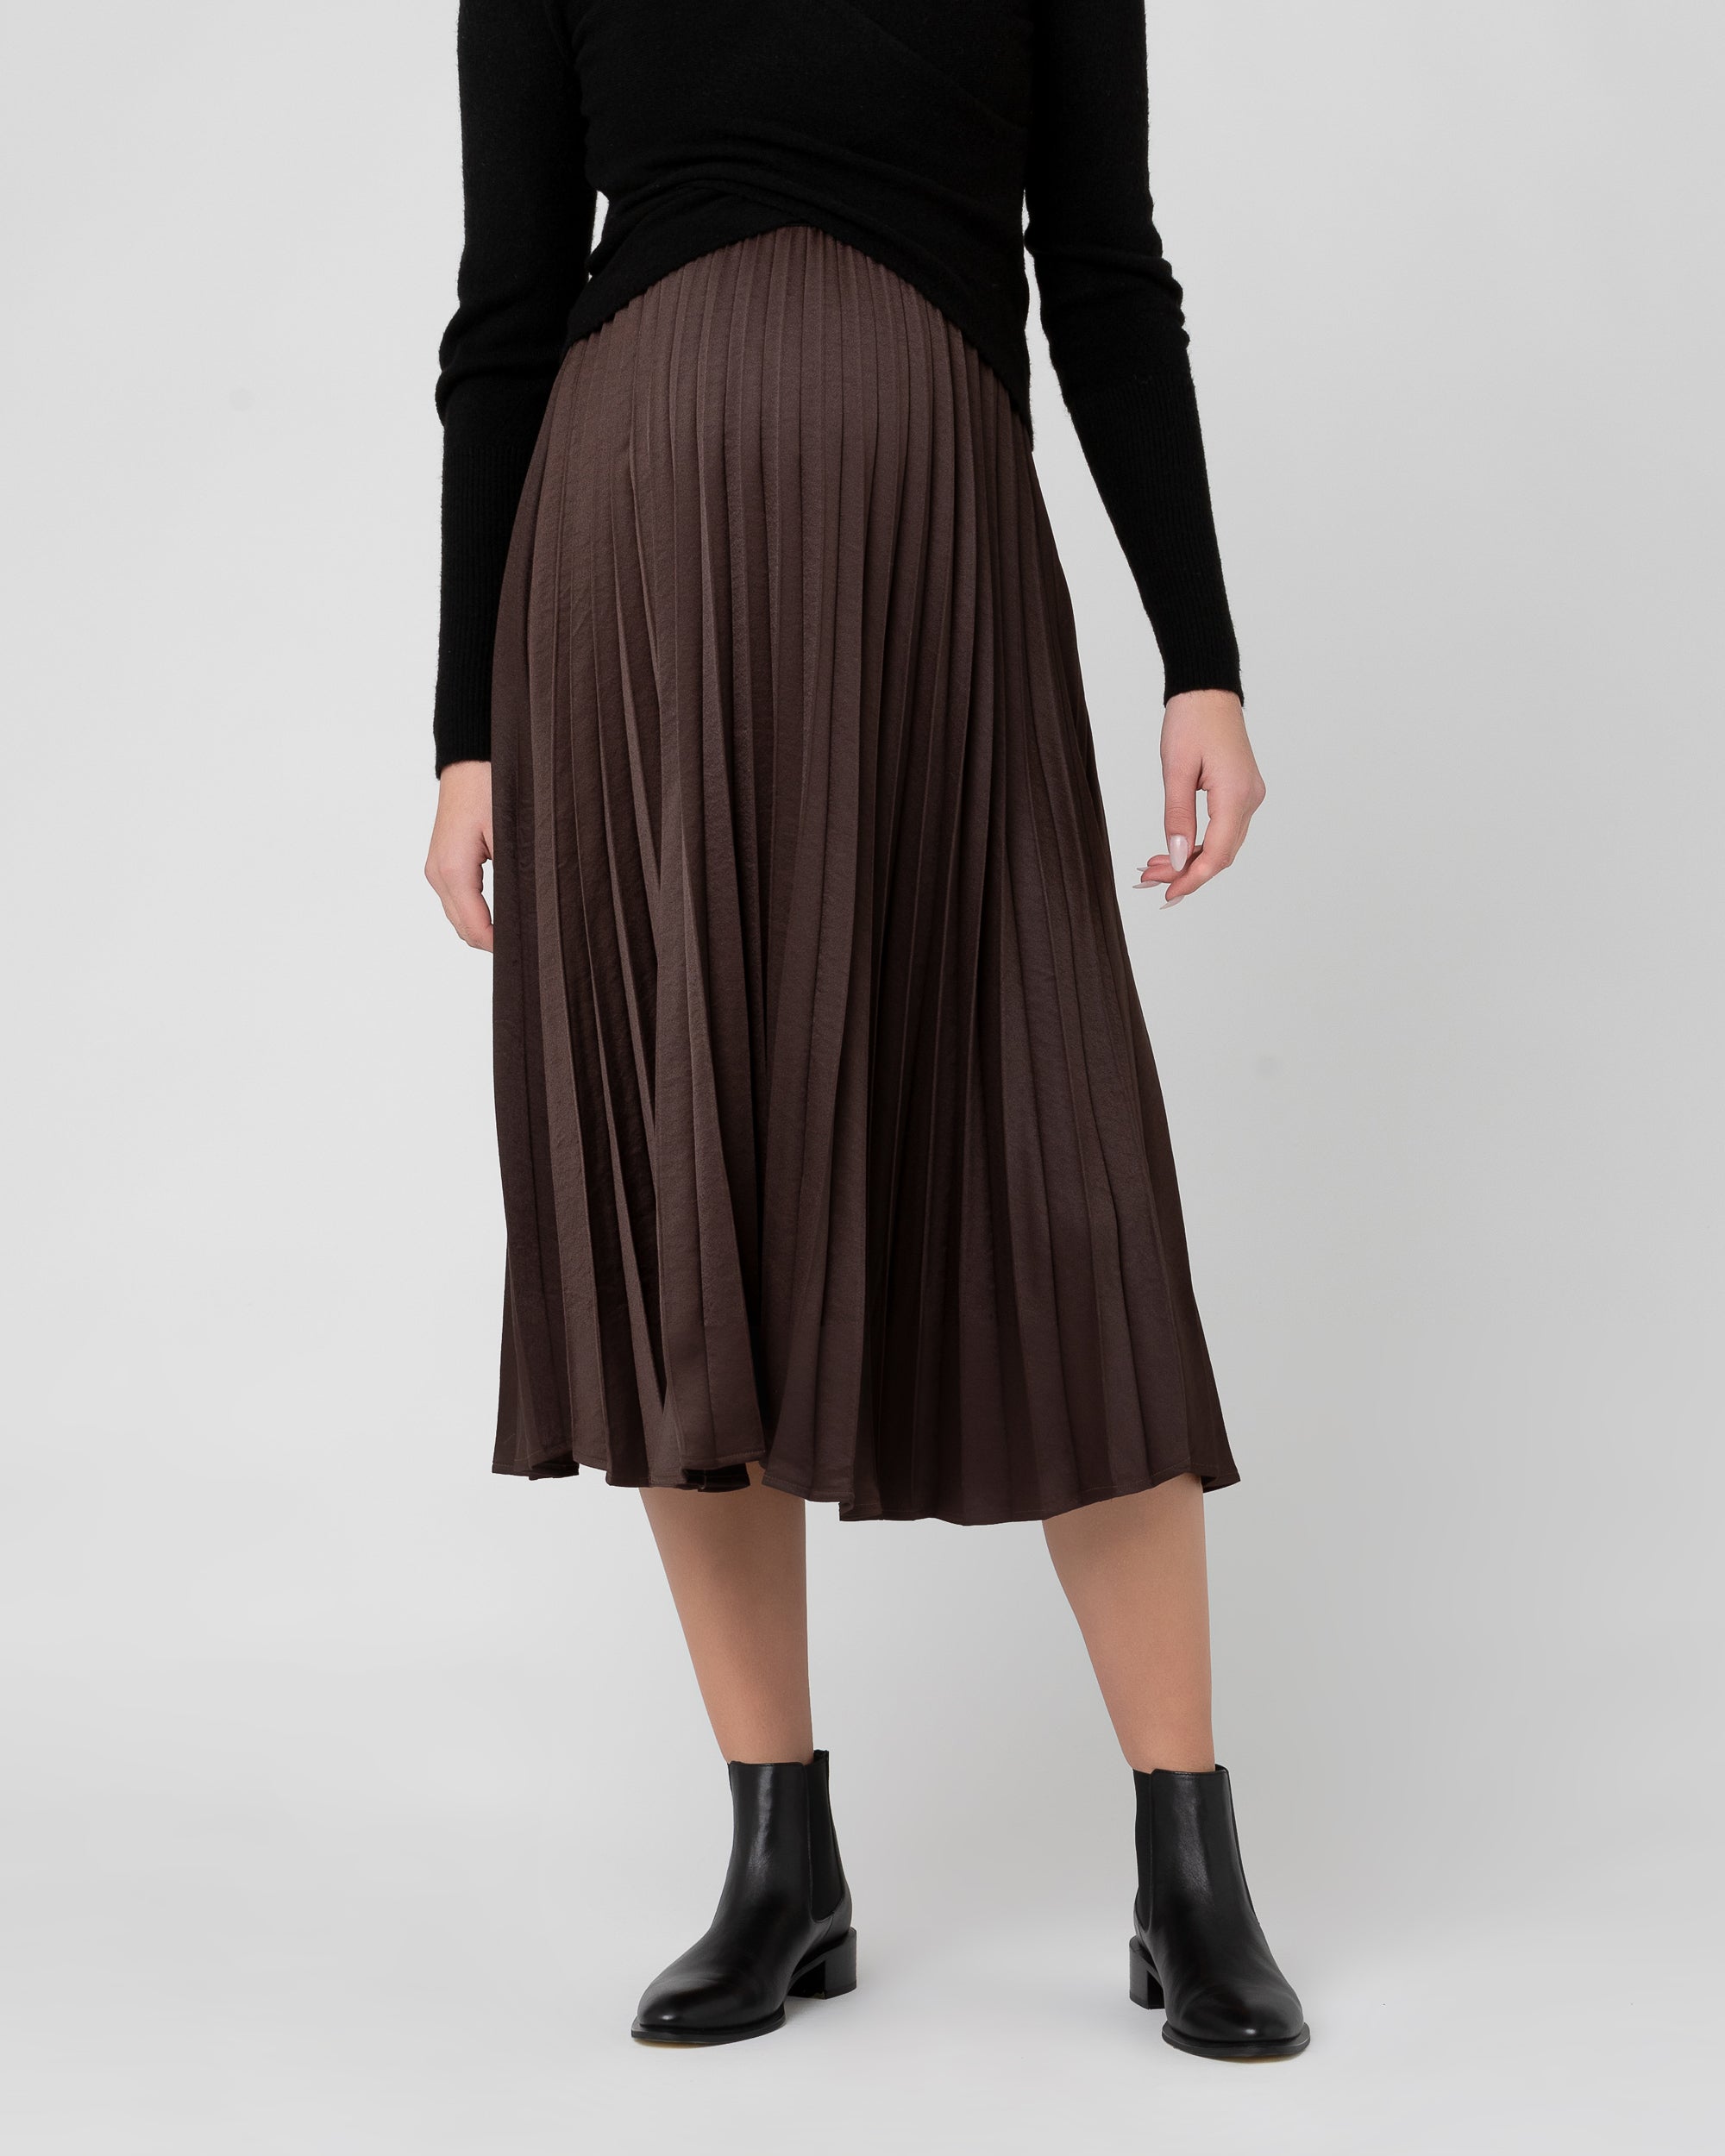 Navy Wool Tech Milano Contrast Stitch Pleated Knee Length Skirt